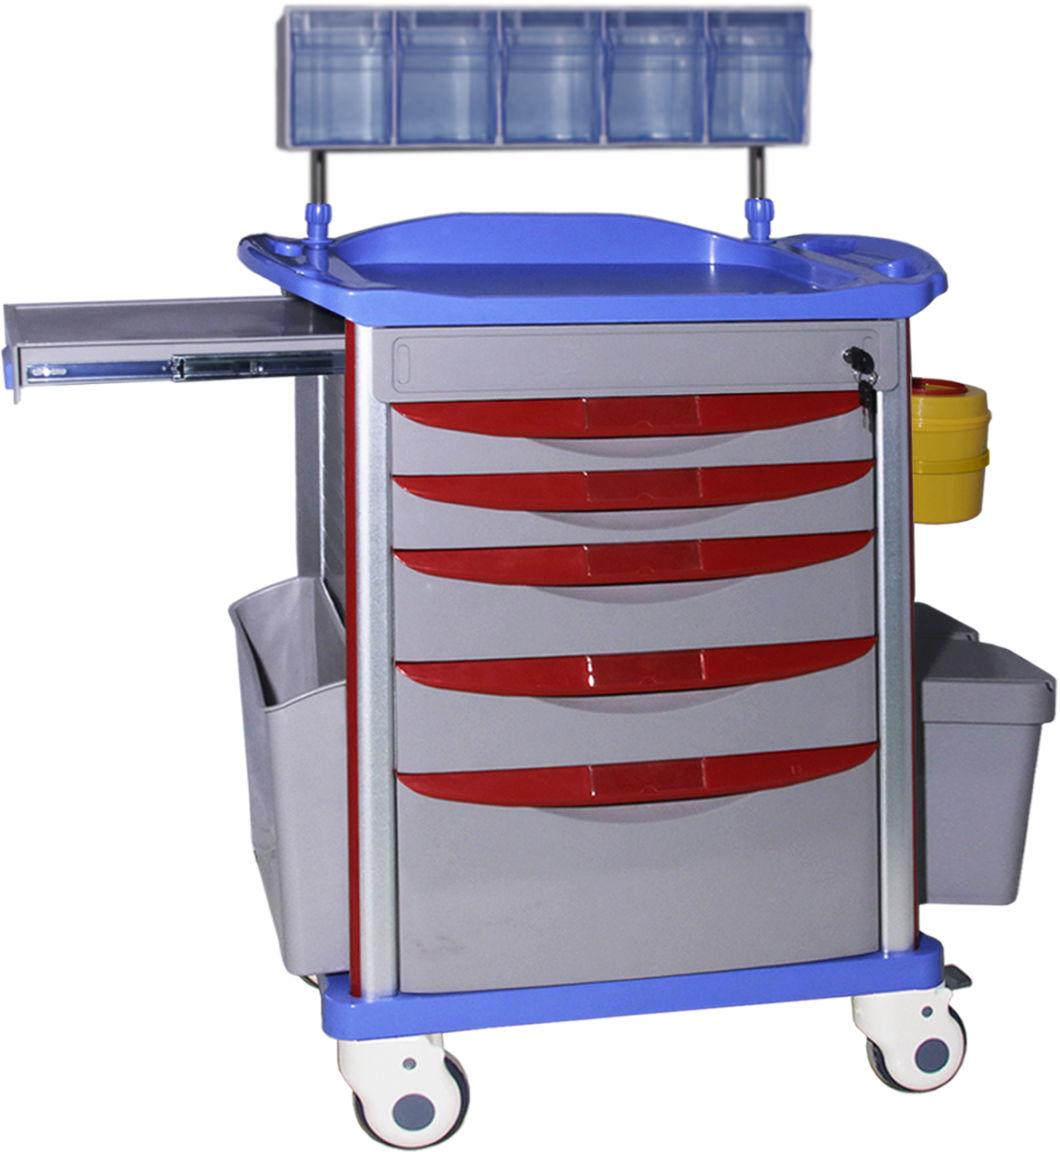 Mn-AC005 Widely Used Medical Trolley Anesthesia Cart for Hospital Room